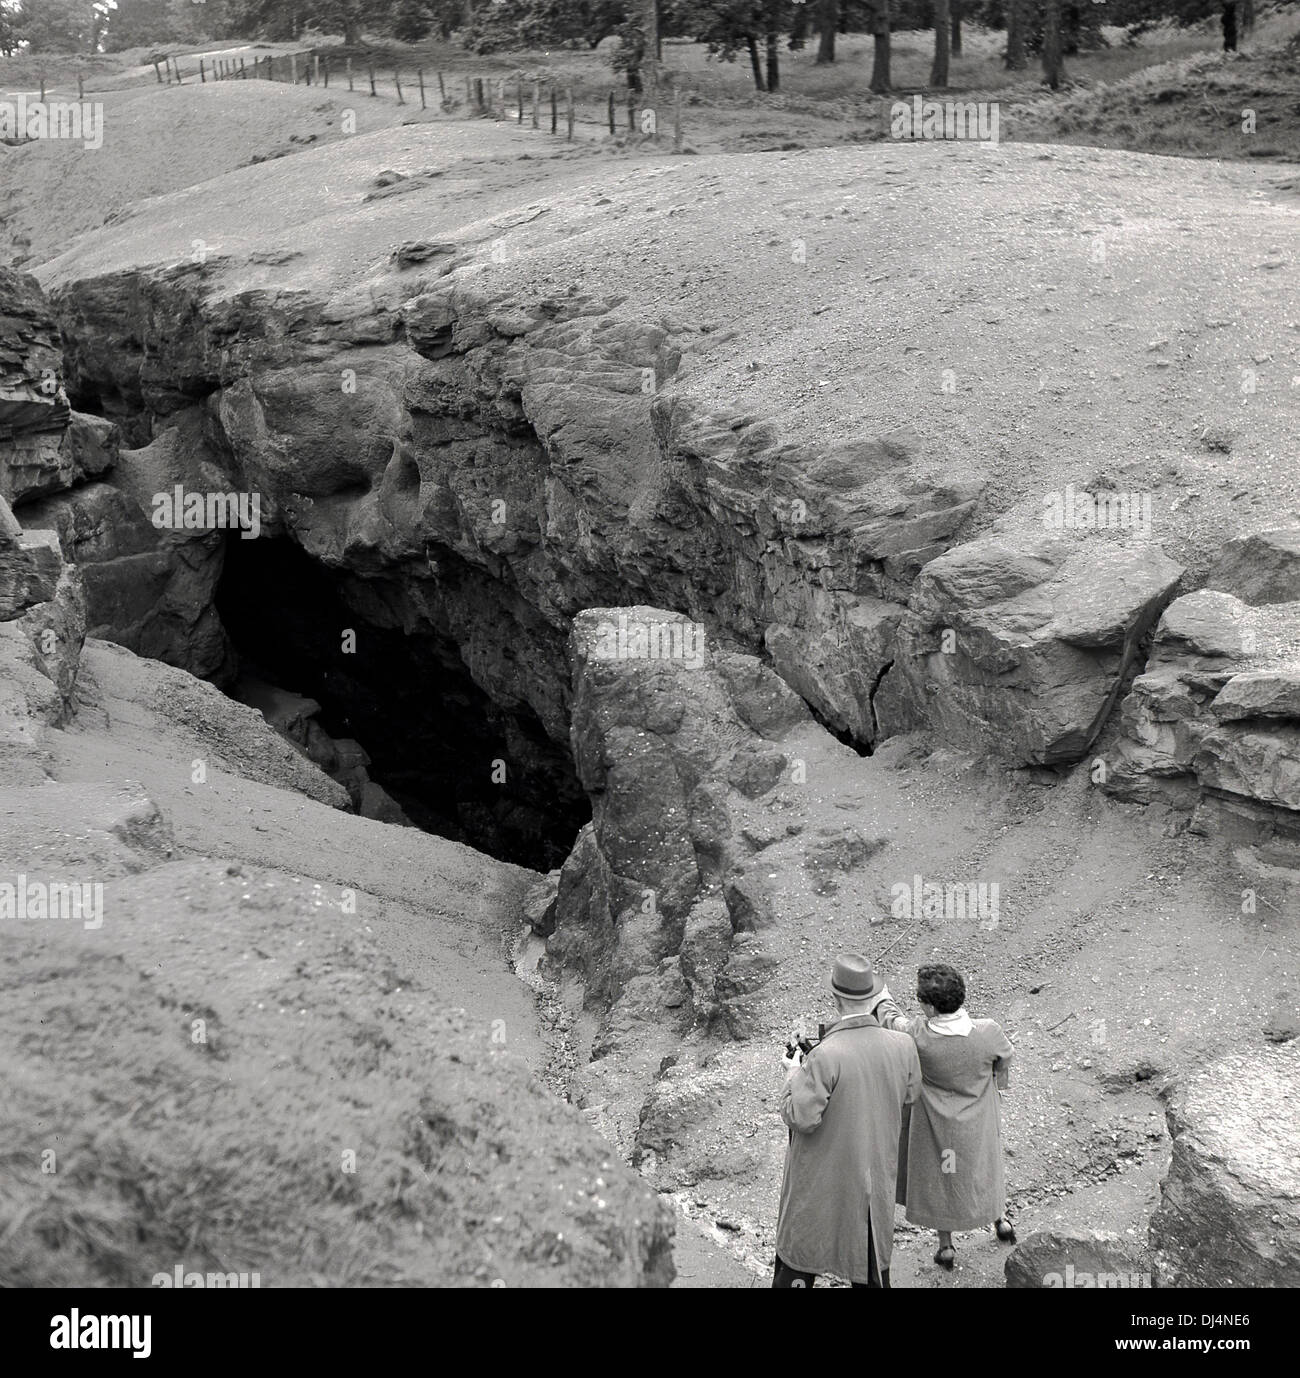 1950s-historical-two-people-studyt-a-large-hole-or-cave-or-rocky-opening-DJ4NE6.jpg